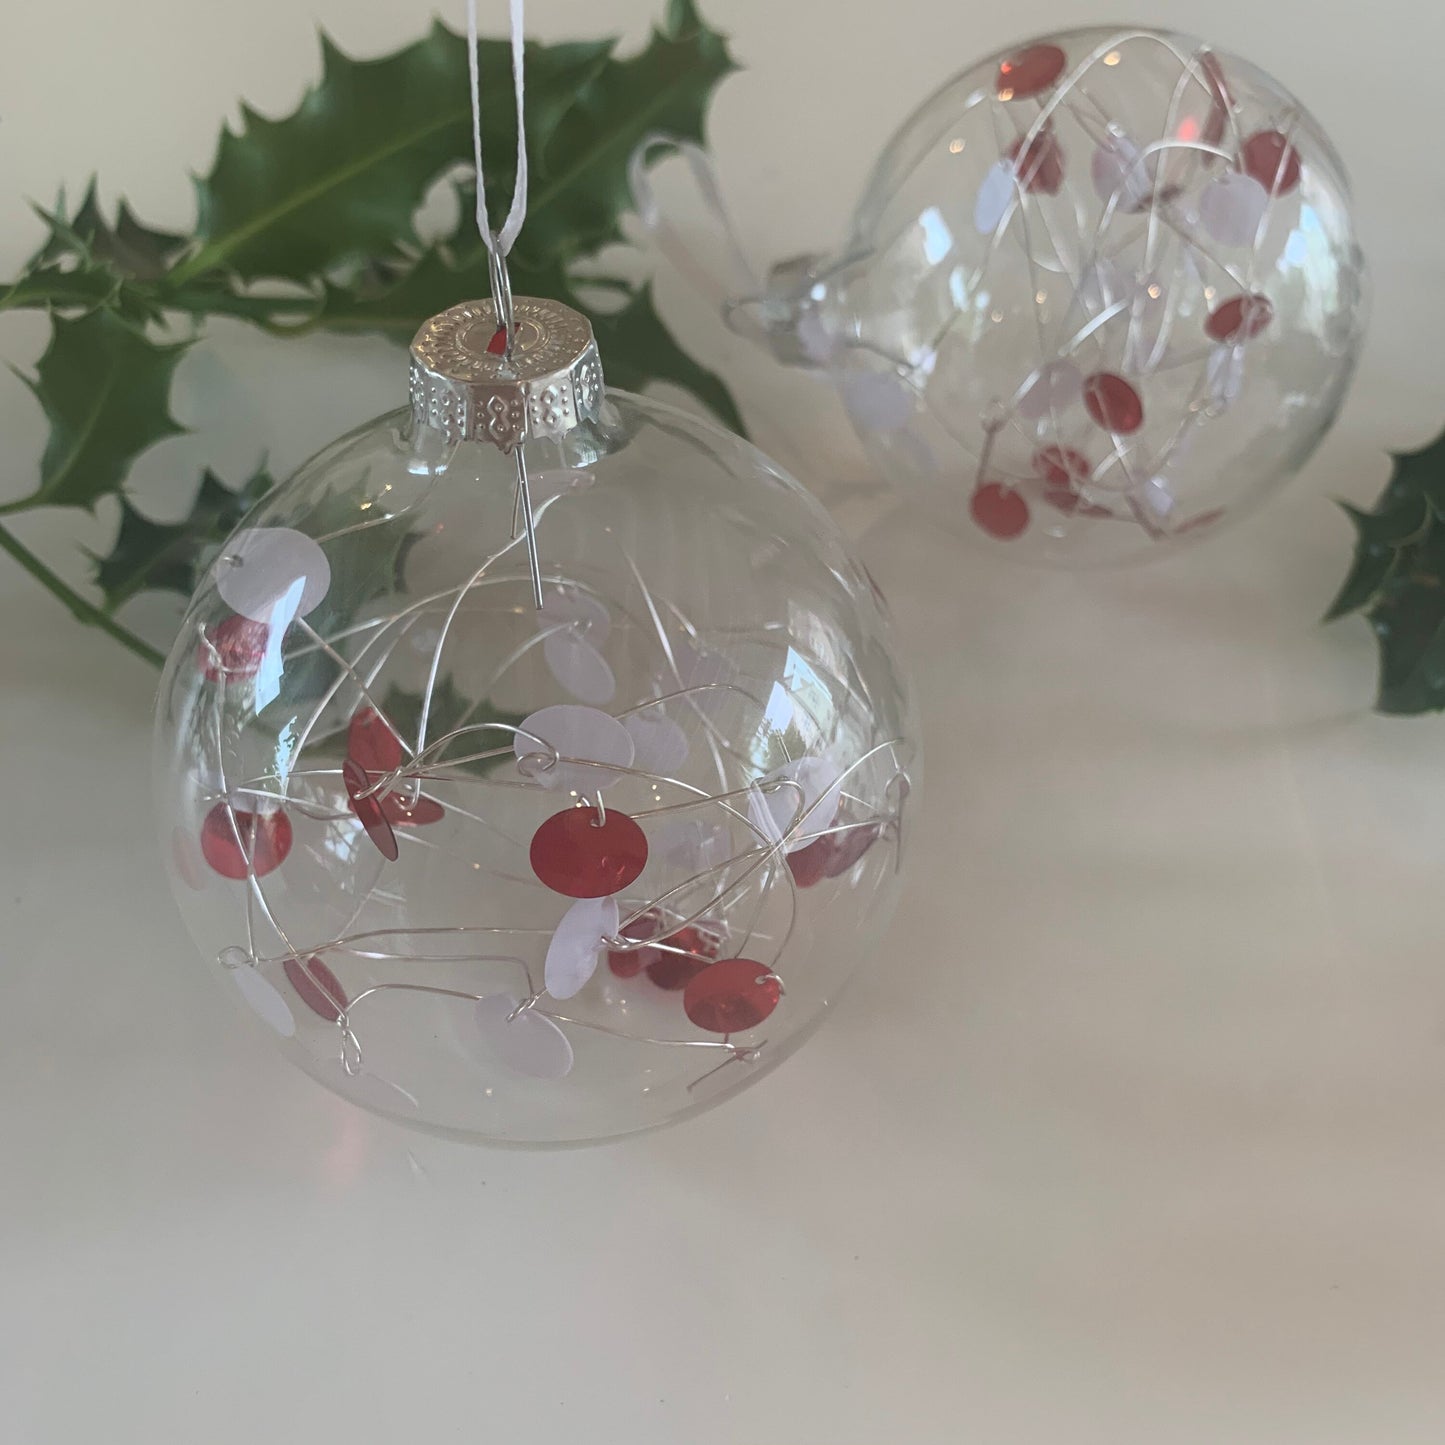 6 Sequin Candy Cane Baubles - Glass Ornament - Christmas Tree Decoration - Clear Glass Xmas - Hand tied Sequins - Red and White decor - 7cm